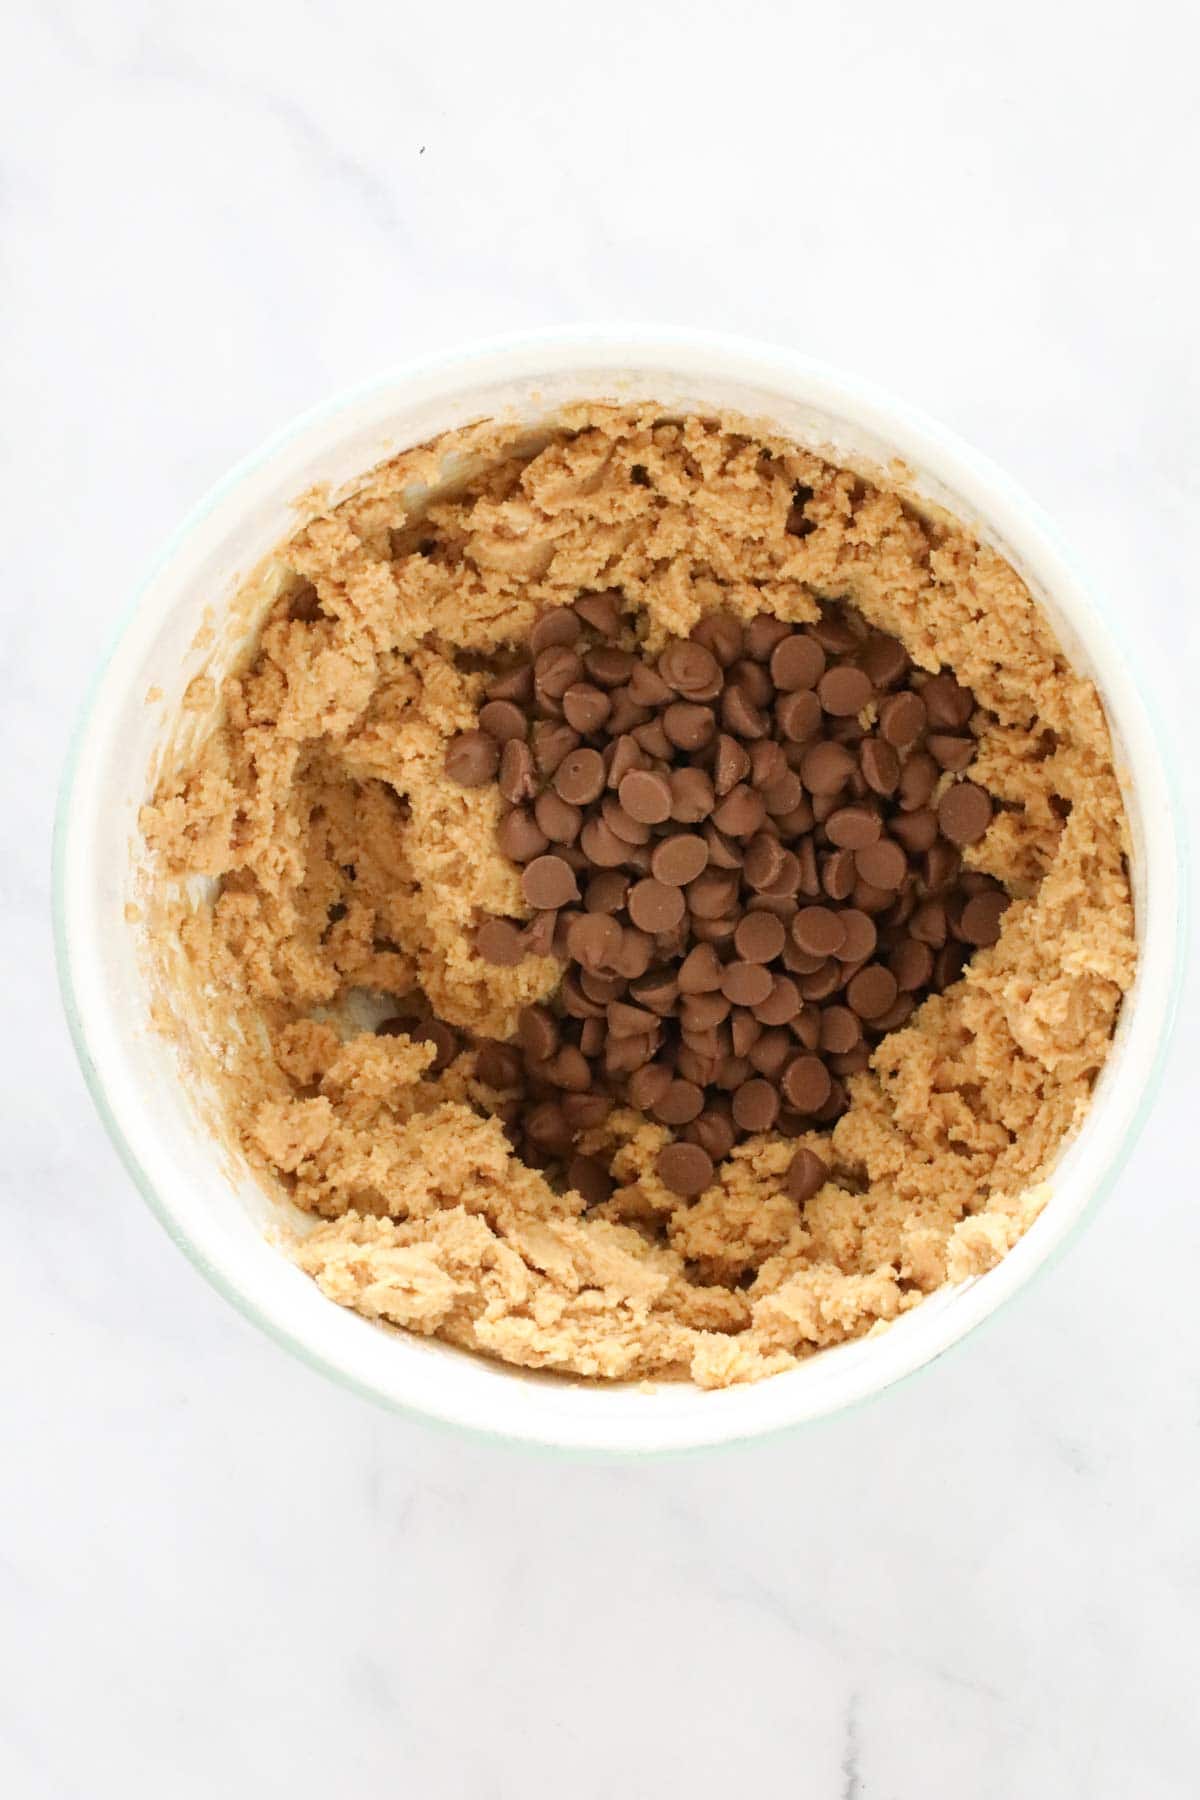 Chocolate chips added to the cookie dough mixture.